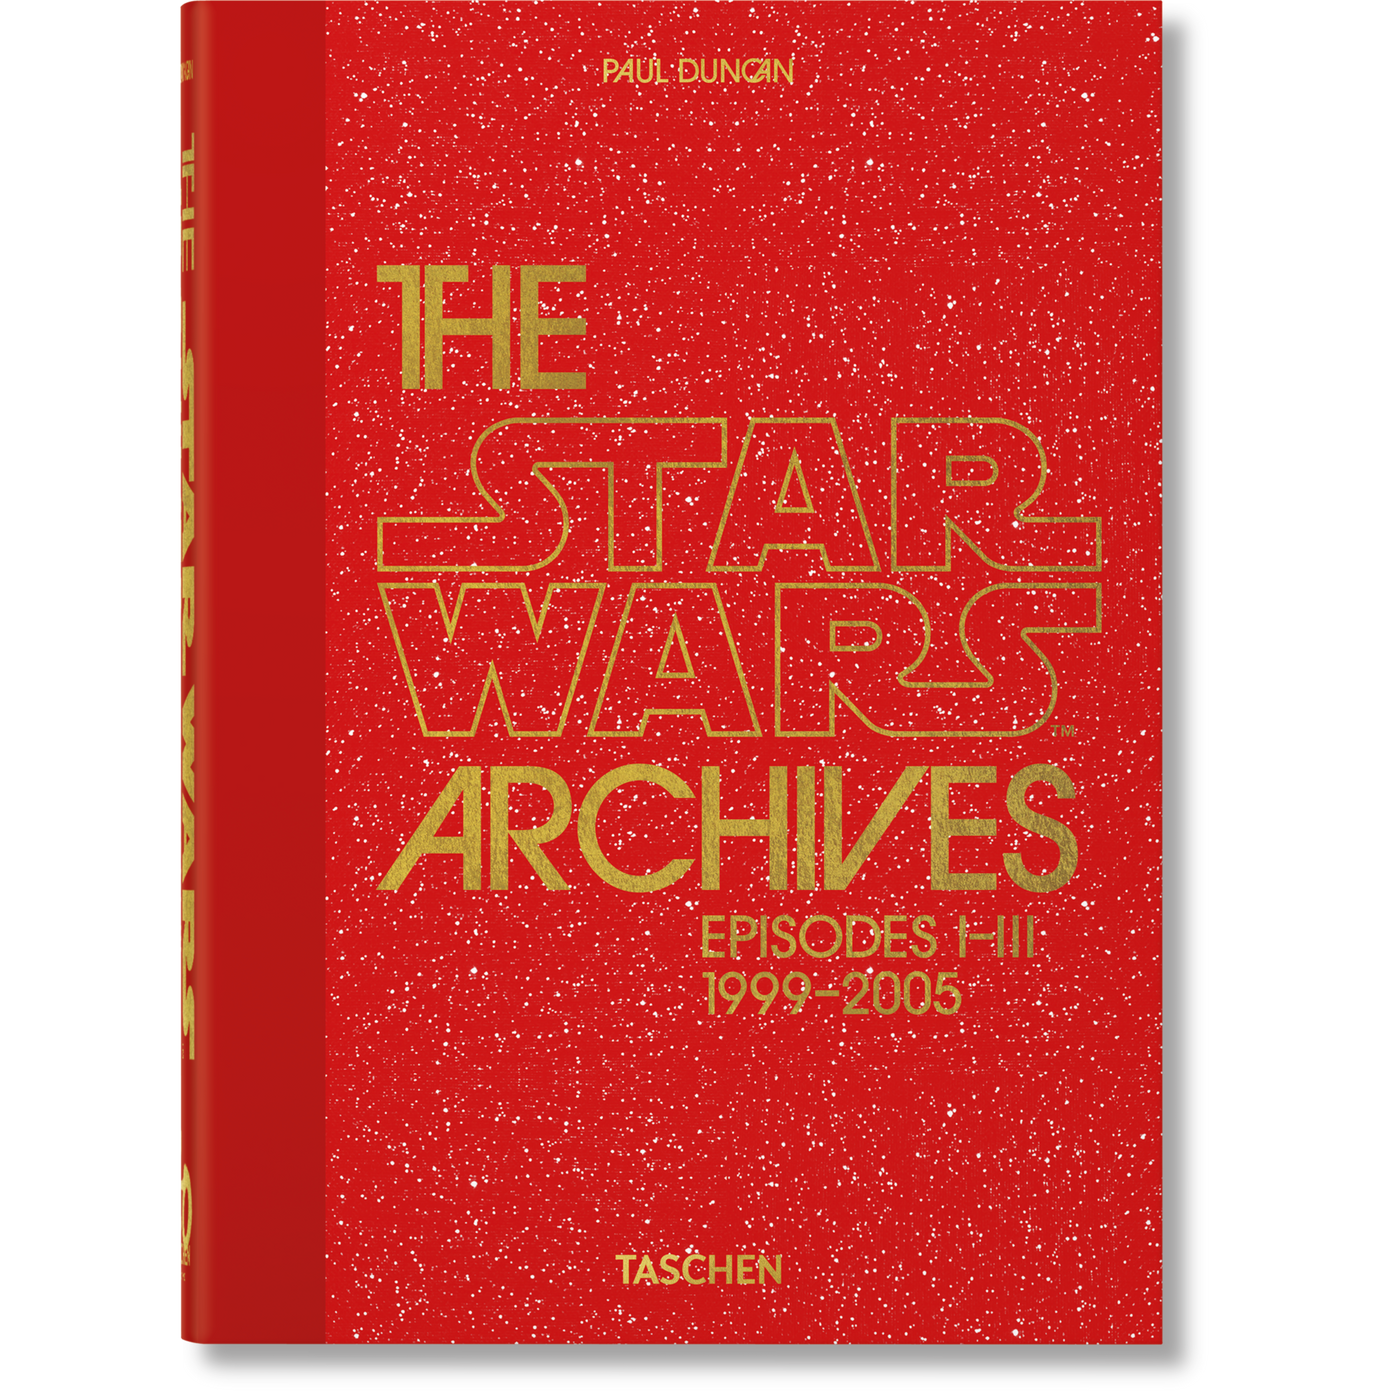 40th Anniversary: The Star Wars Archives 1999-2005